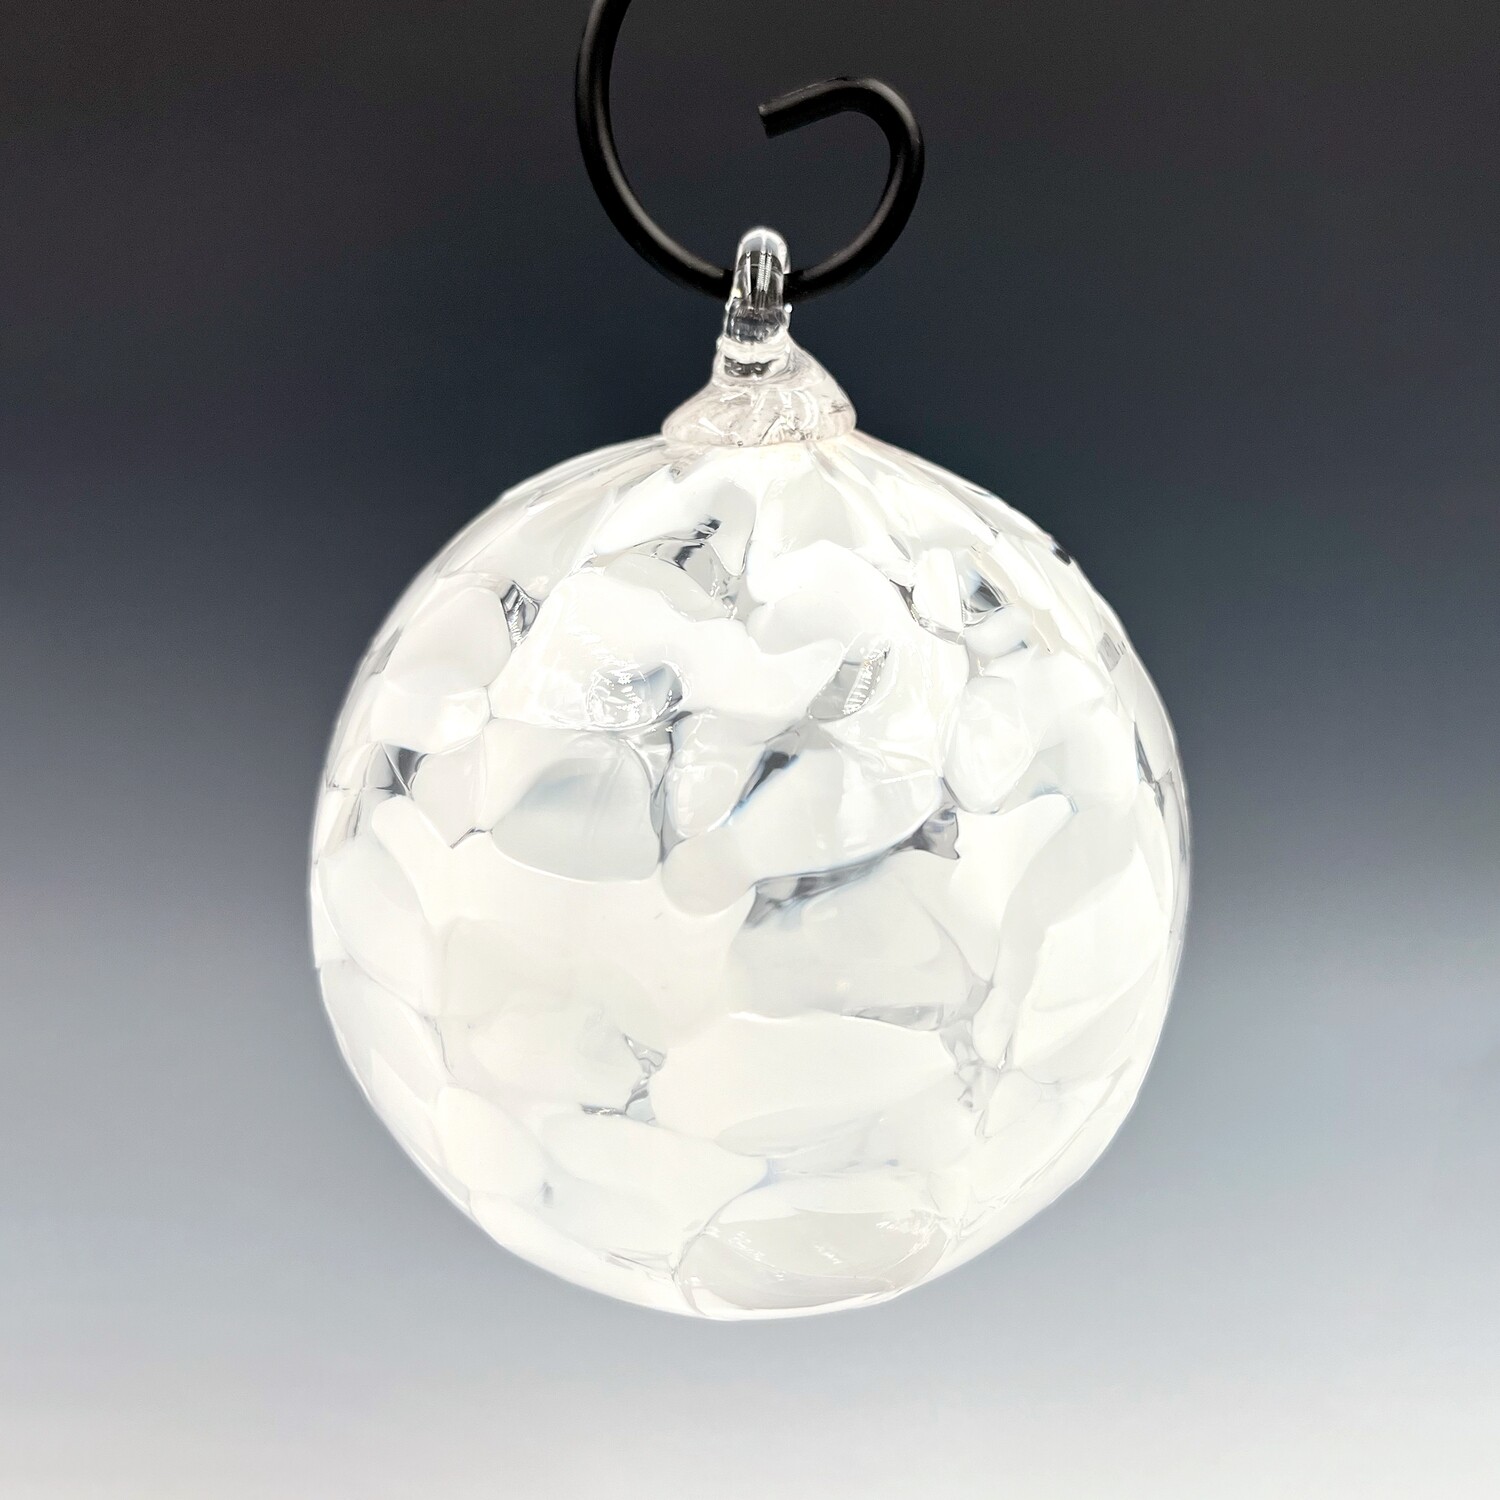 Glass Ornament in Snowflake Mix